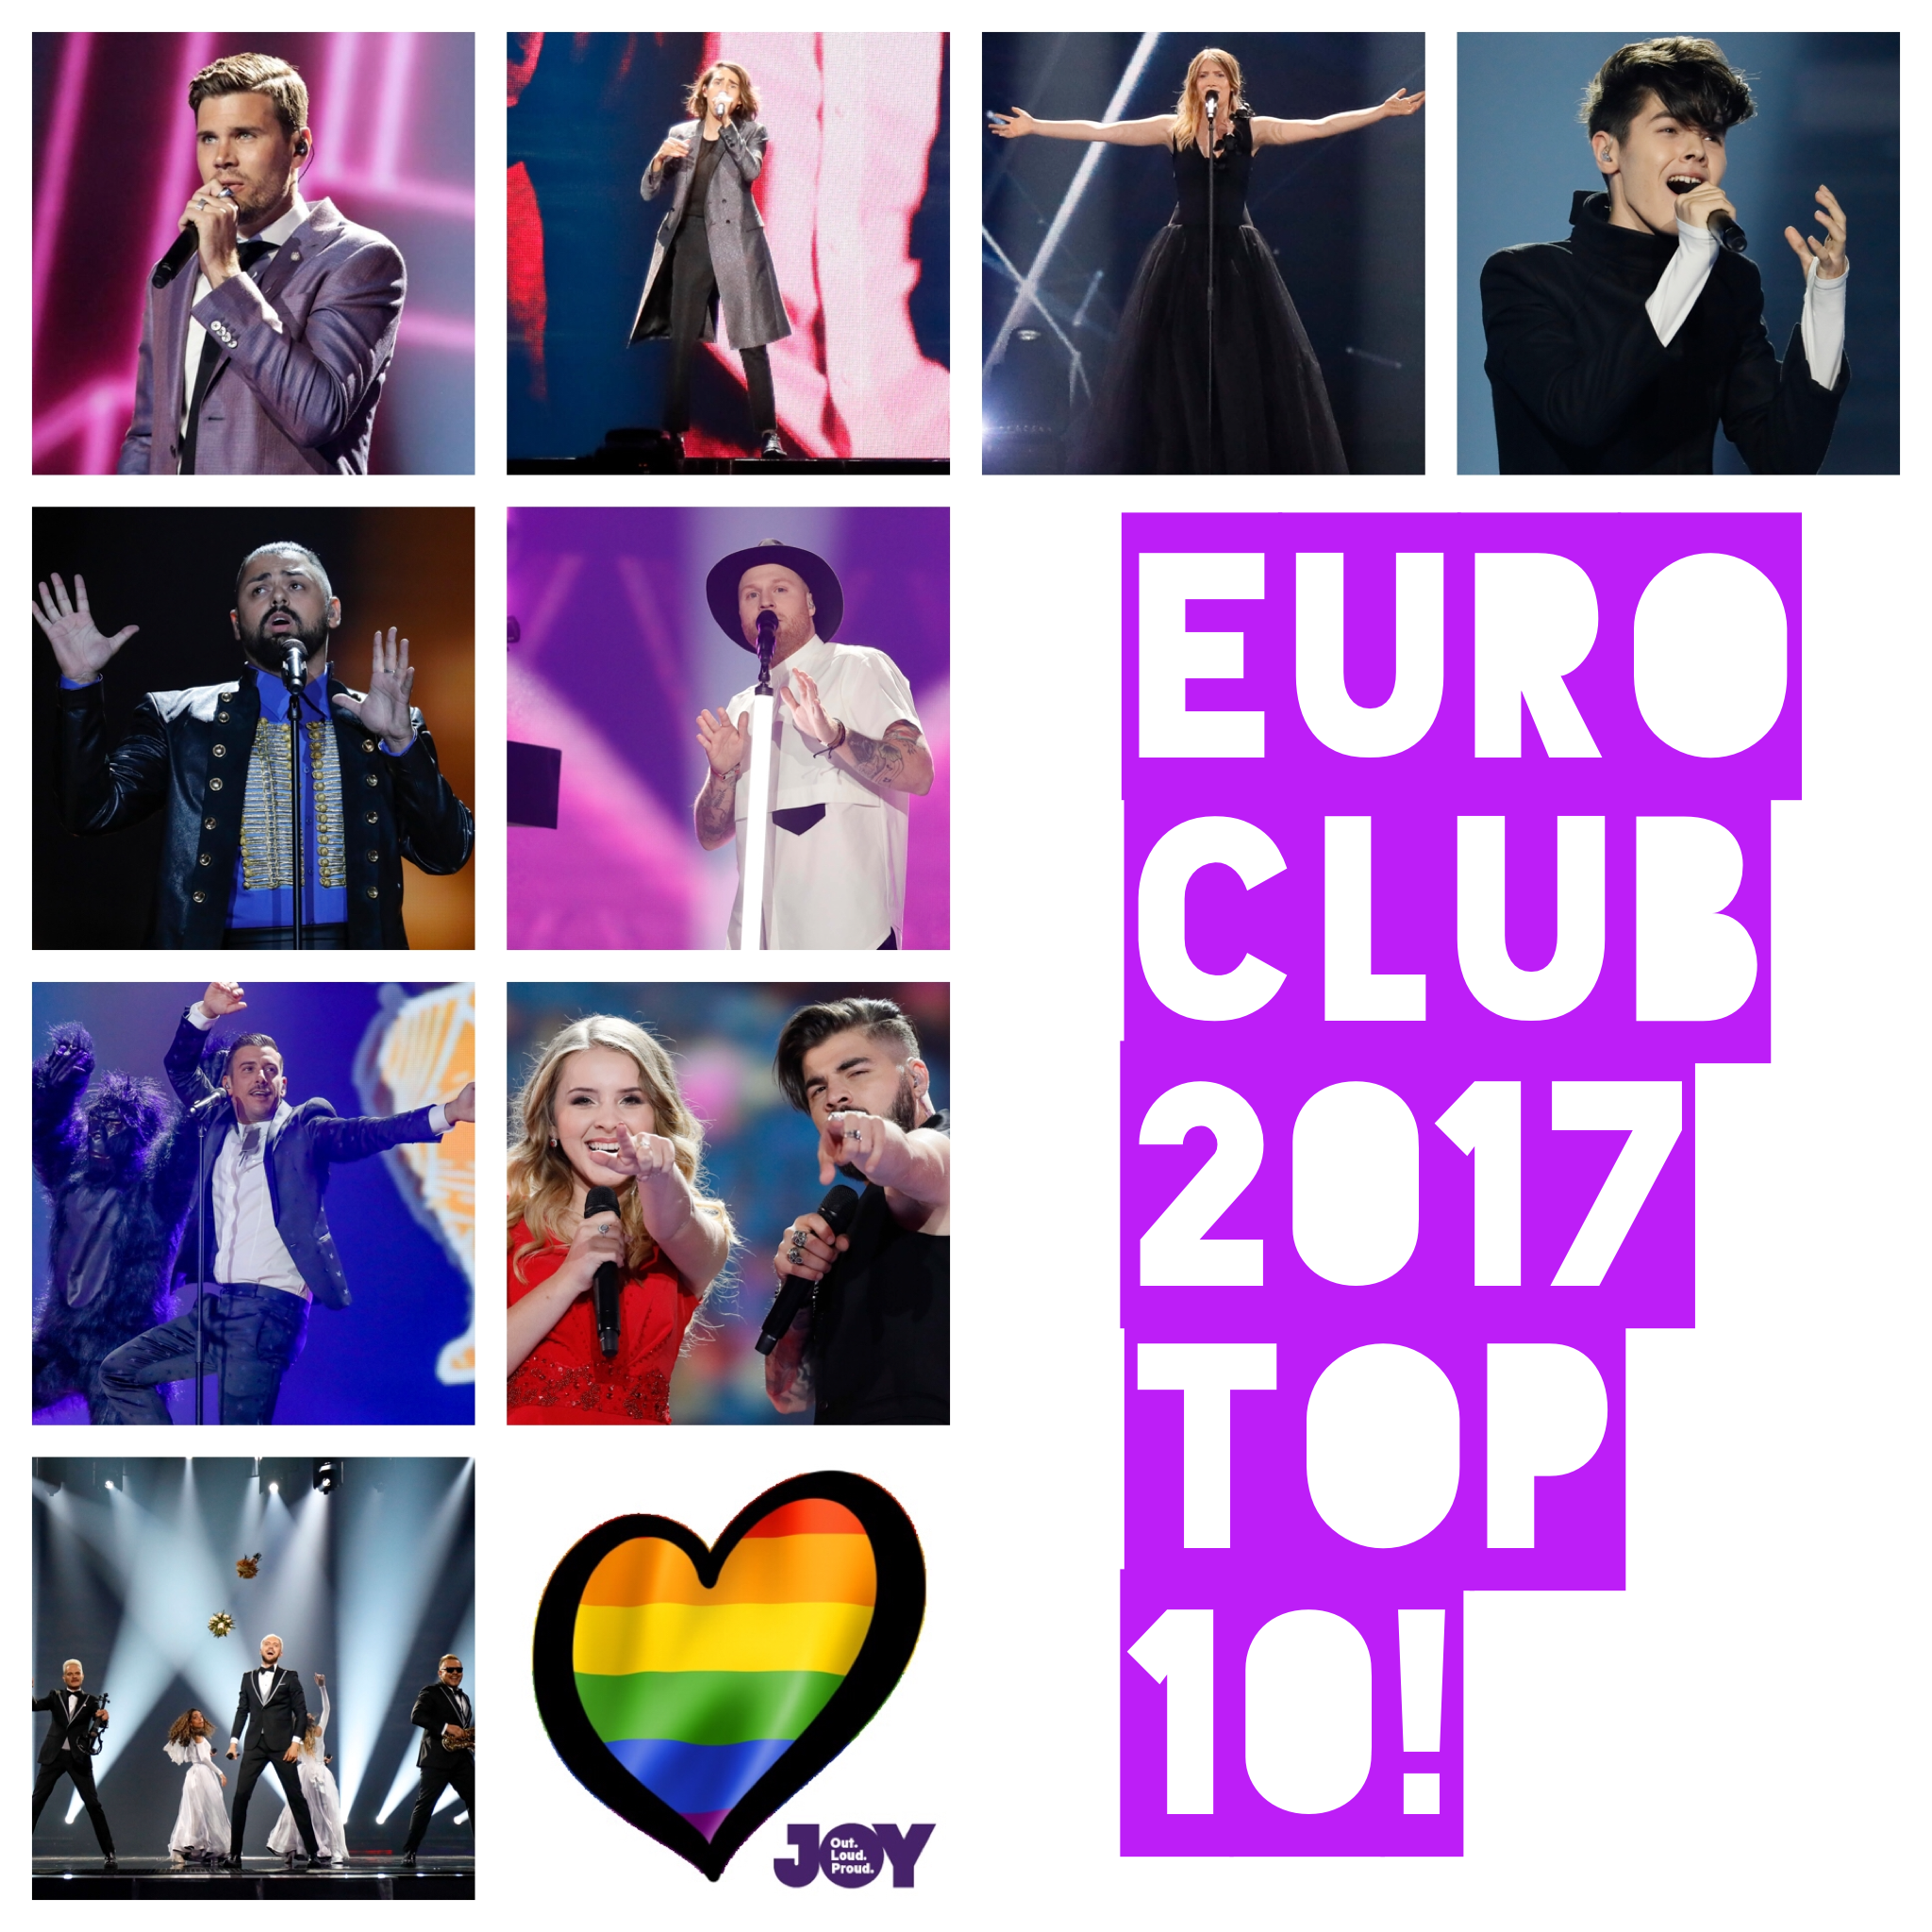 It’s a 2017 Eurovision Top 10 Euro Club party!